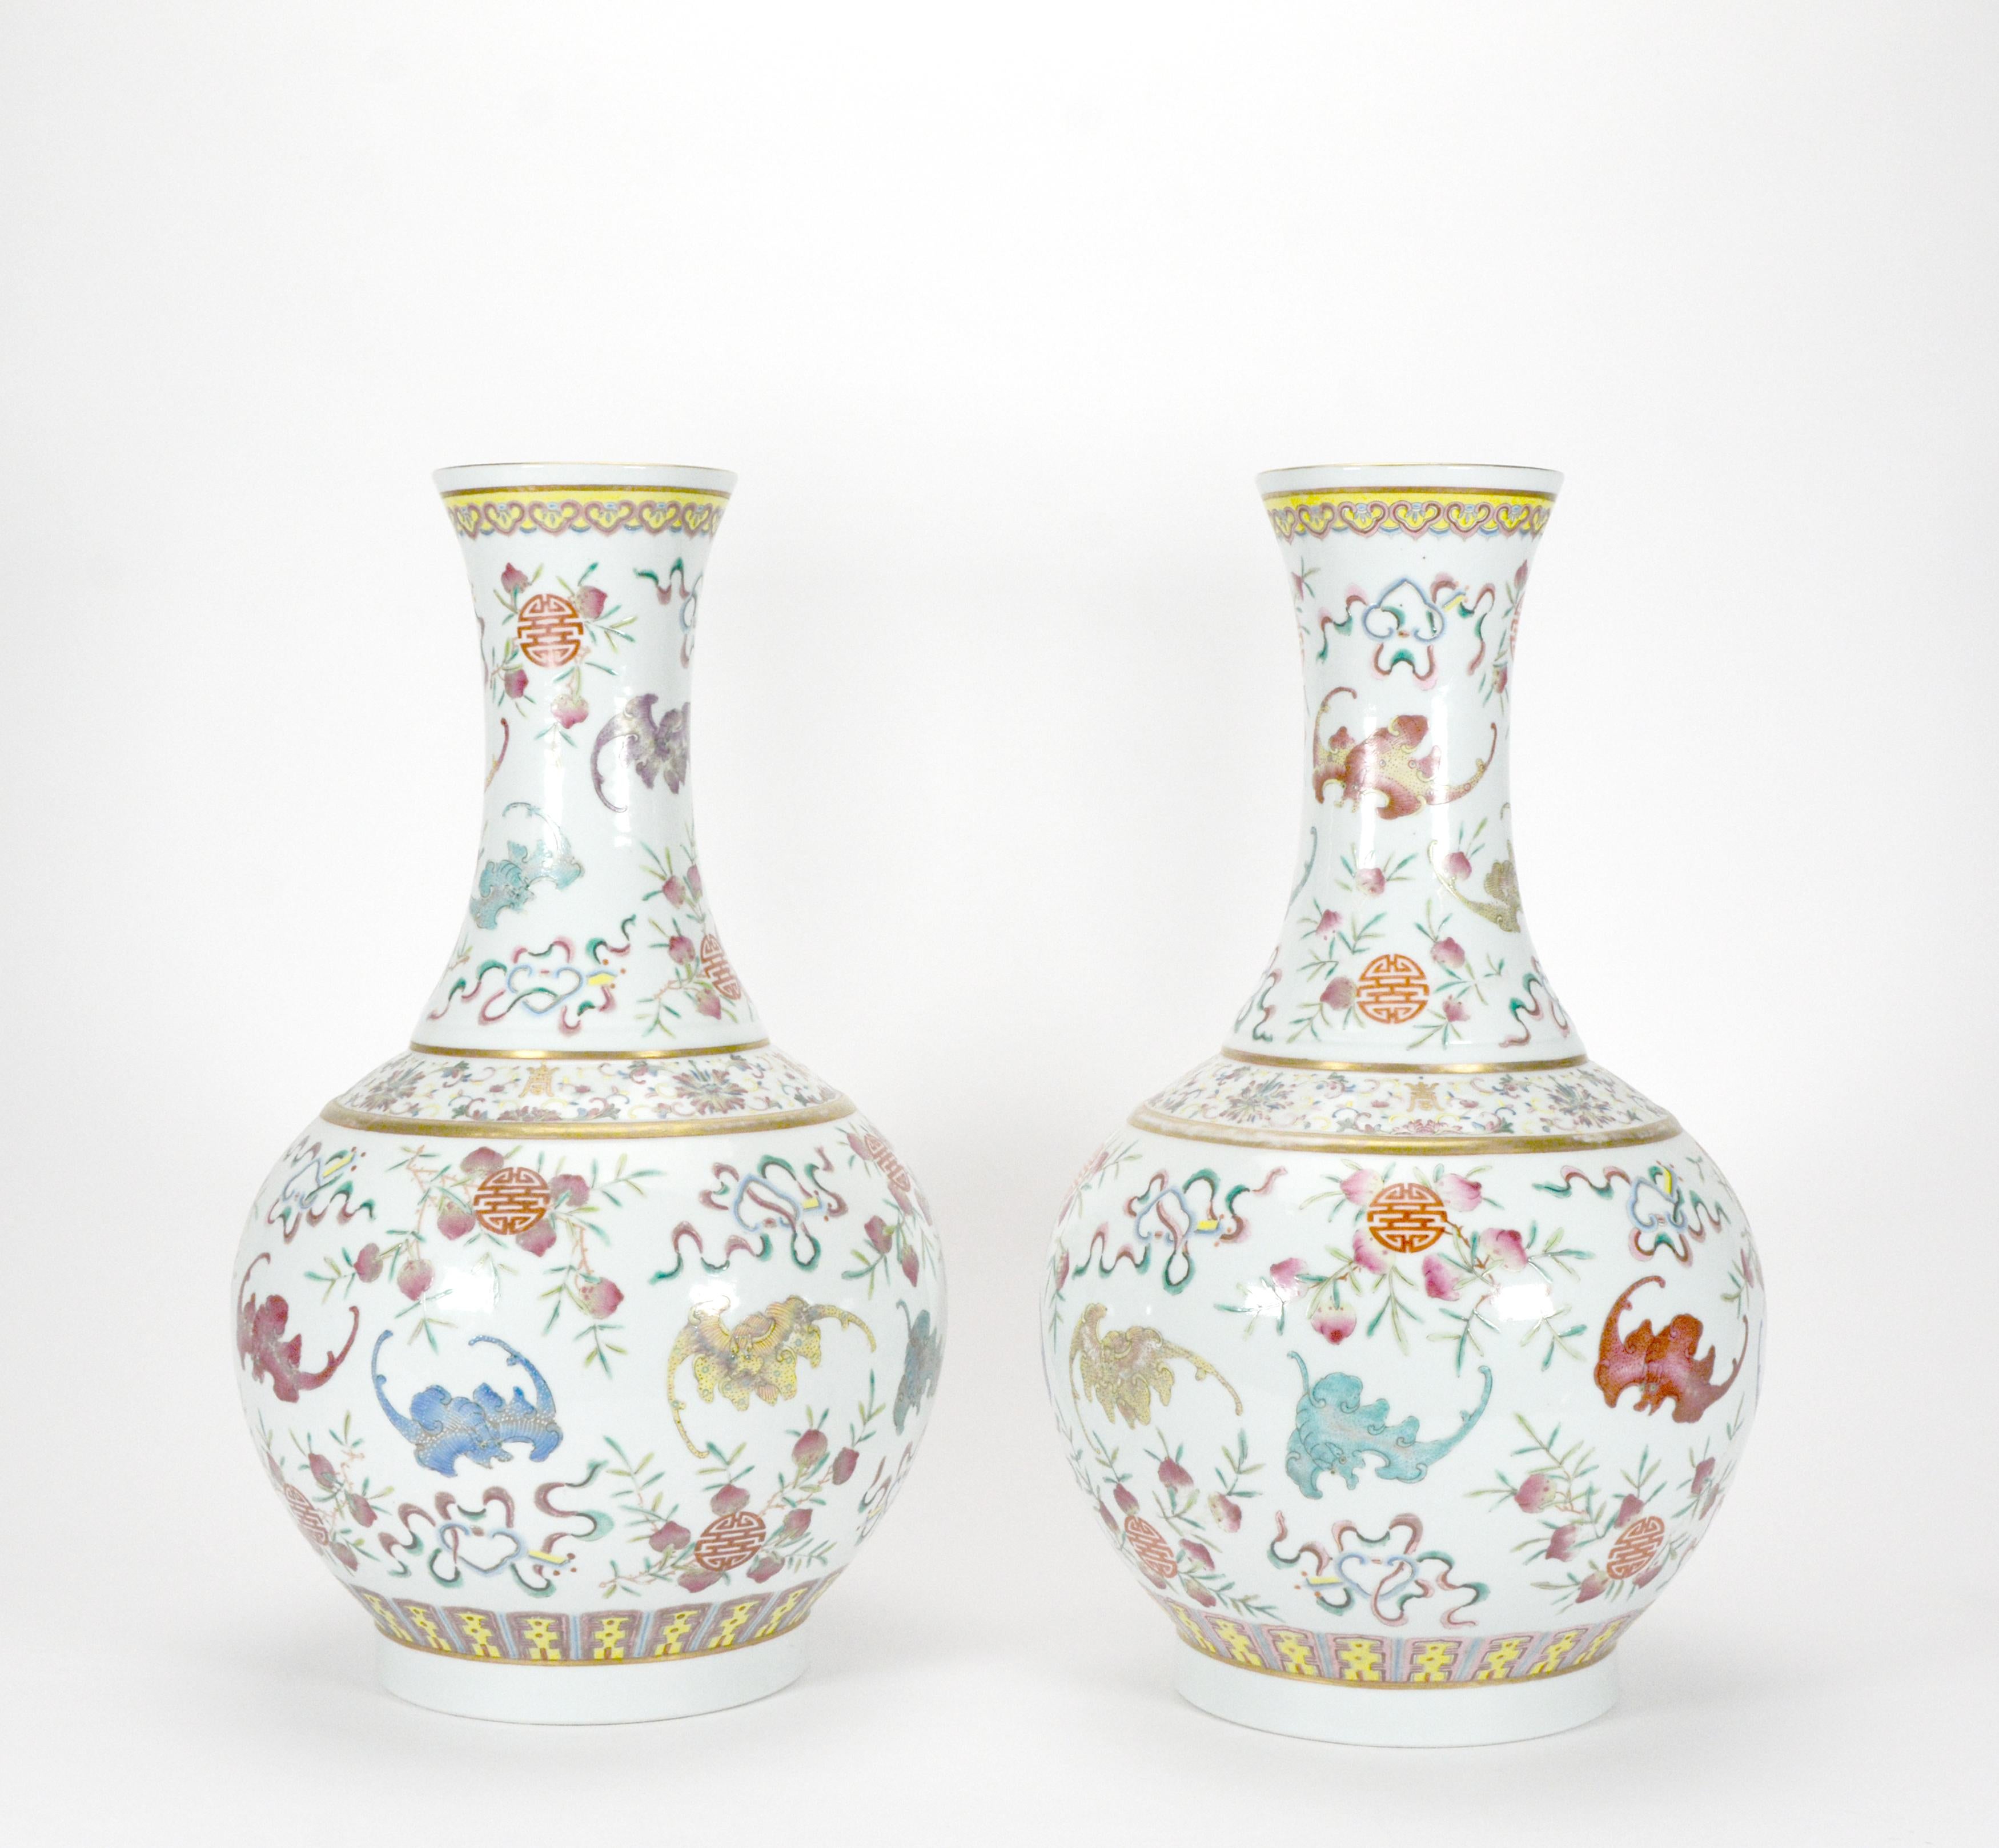 Pair of Antique Chinese Qing Guangxu Bat & Peach Floral Globular Porcelain Vase In Good Condition For Sale In Danville, CA